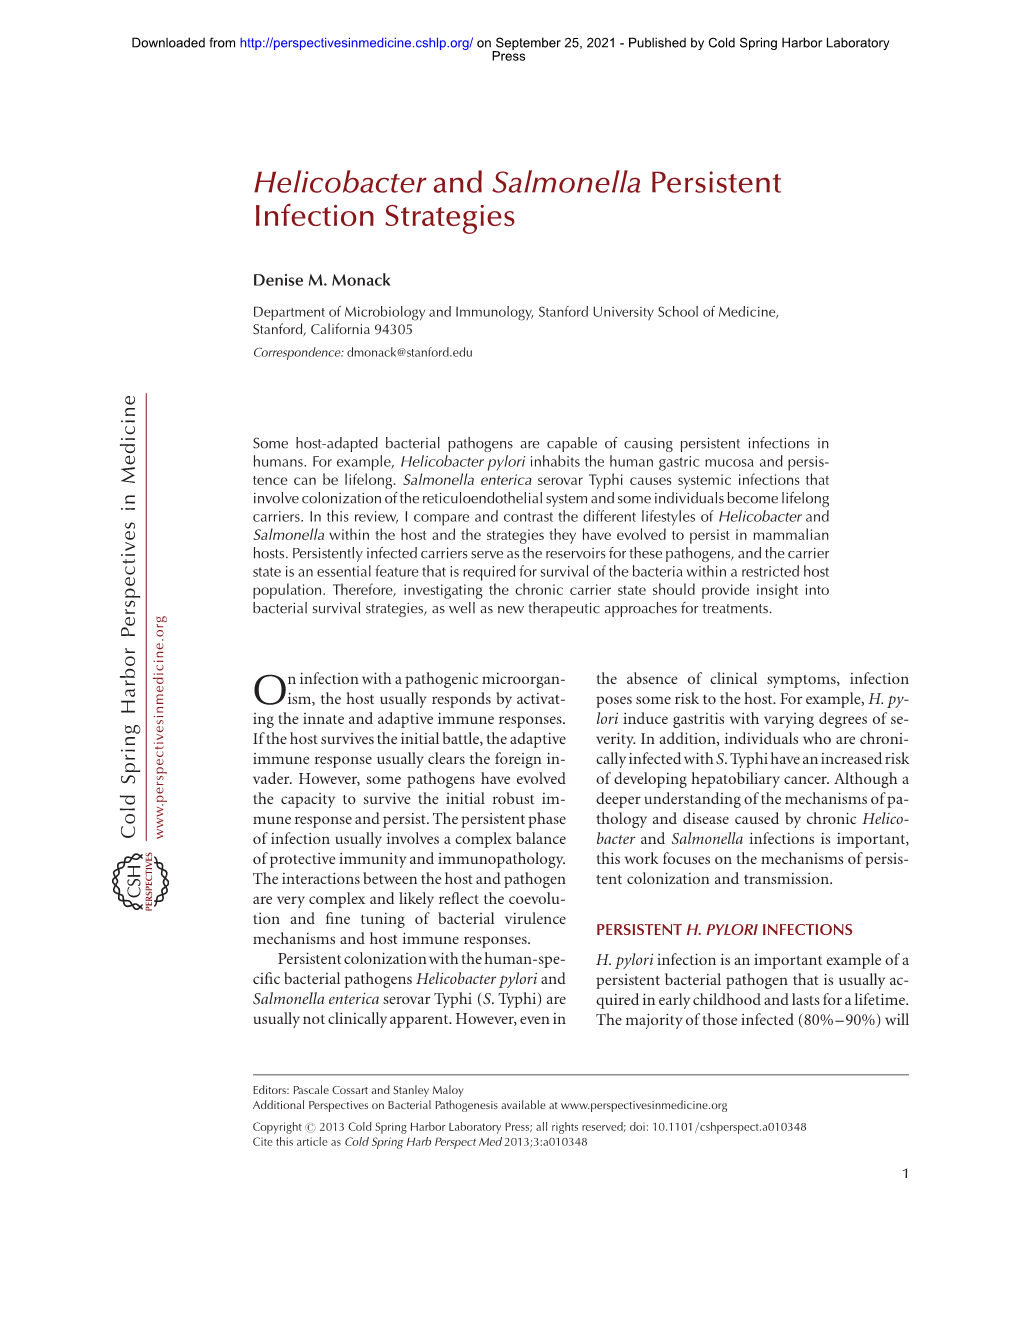 Helicobacter and Salmonella Persistent Infection Strategies